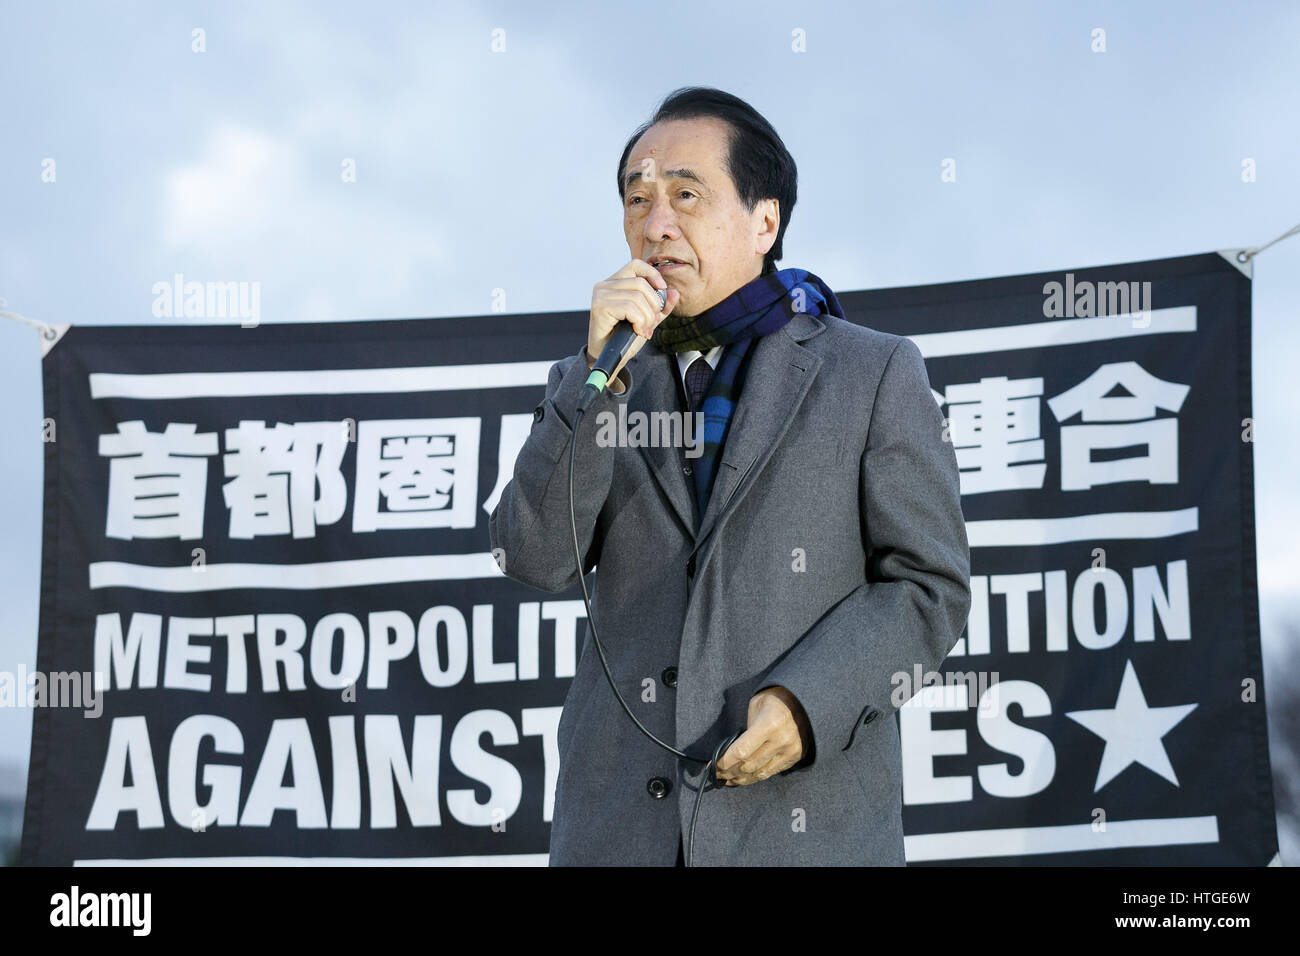 Tokyo, Japan. 11th March 2017.  Japan's former Prime Minister and antinuclear advocate Naoto Kan makes a speech outside the National Diet Building during a rally held by the Metropolitan Coalition Against Nukes on March 11, 2017, Tokyo, Japan. The protest comes during the sixth anniversary of the Great East Japan Earthquake and Tsunami disaster that led to the outbreak of the Fukushima nuclear crisis. Credit: Rodrigo Reyes Marin/AFLO/Alamy Live News Stock Photo